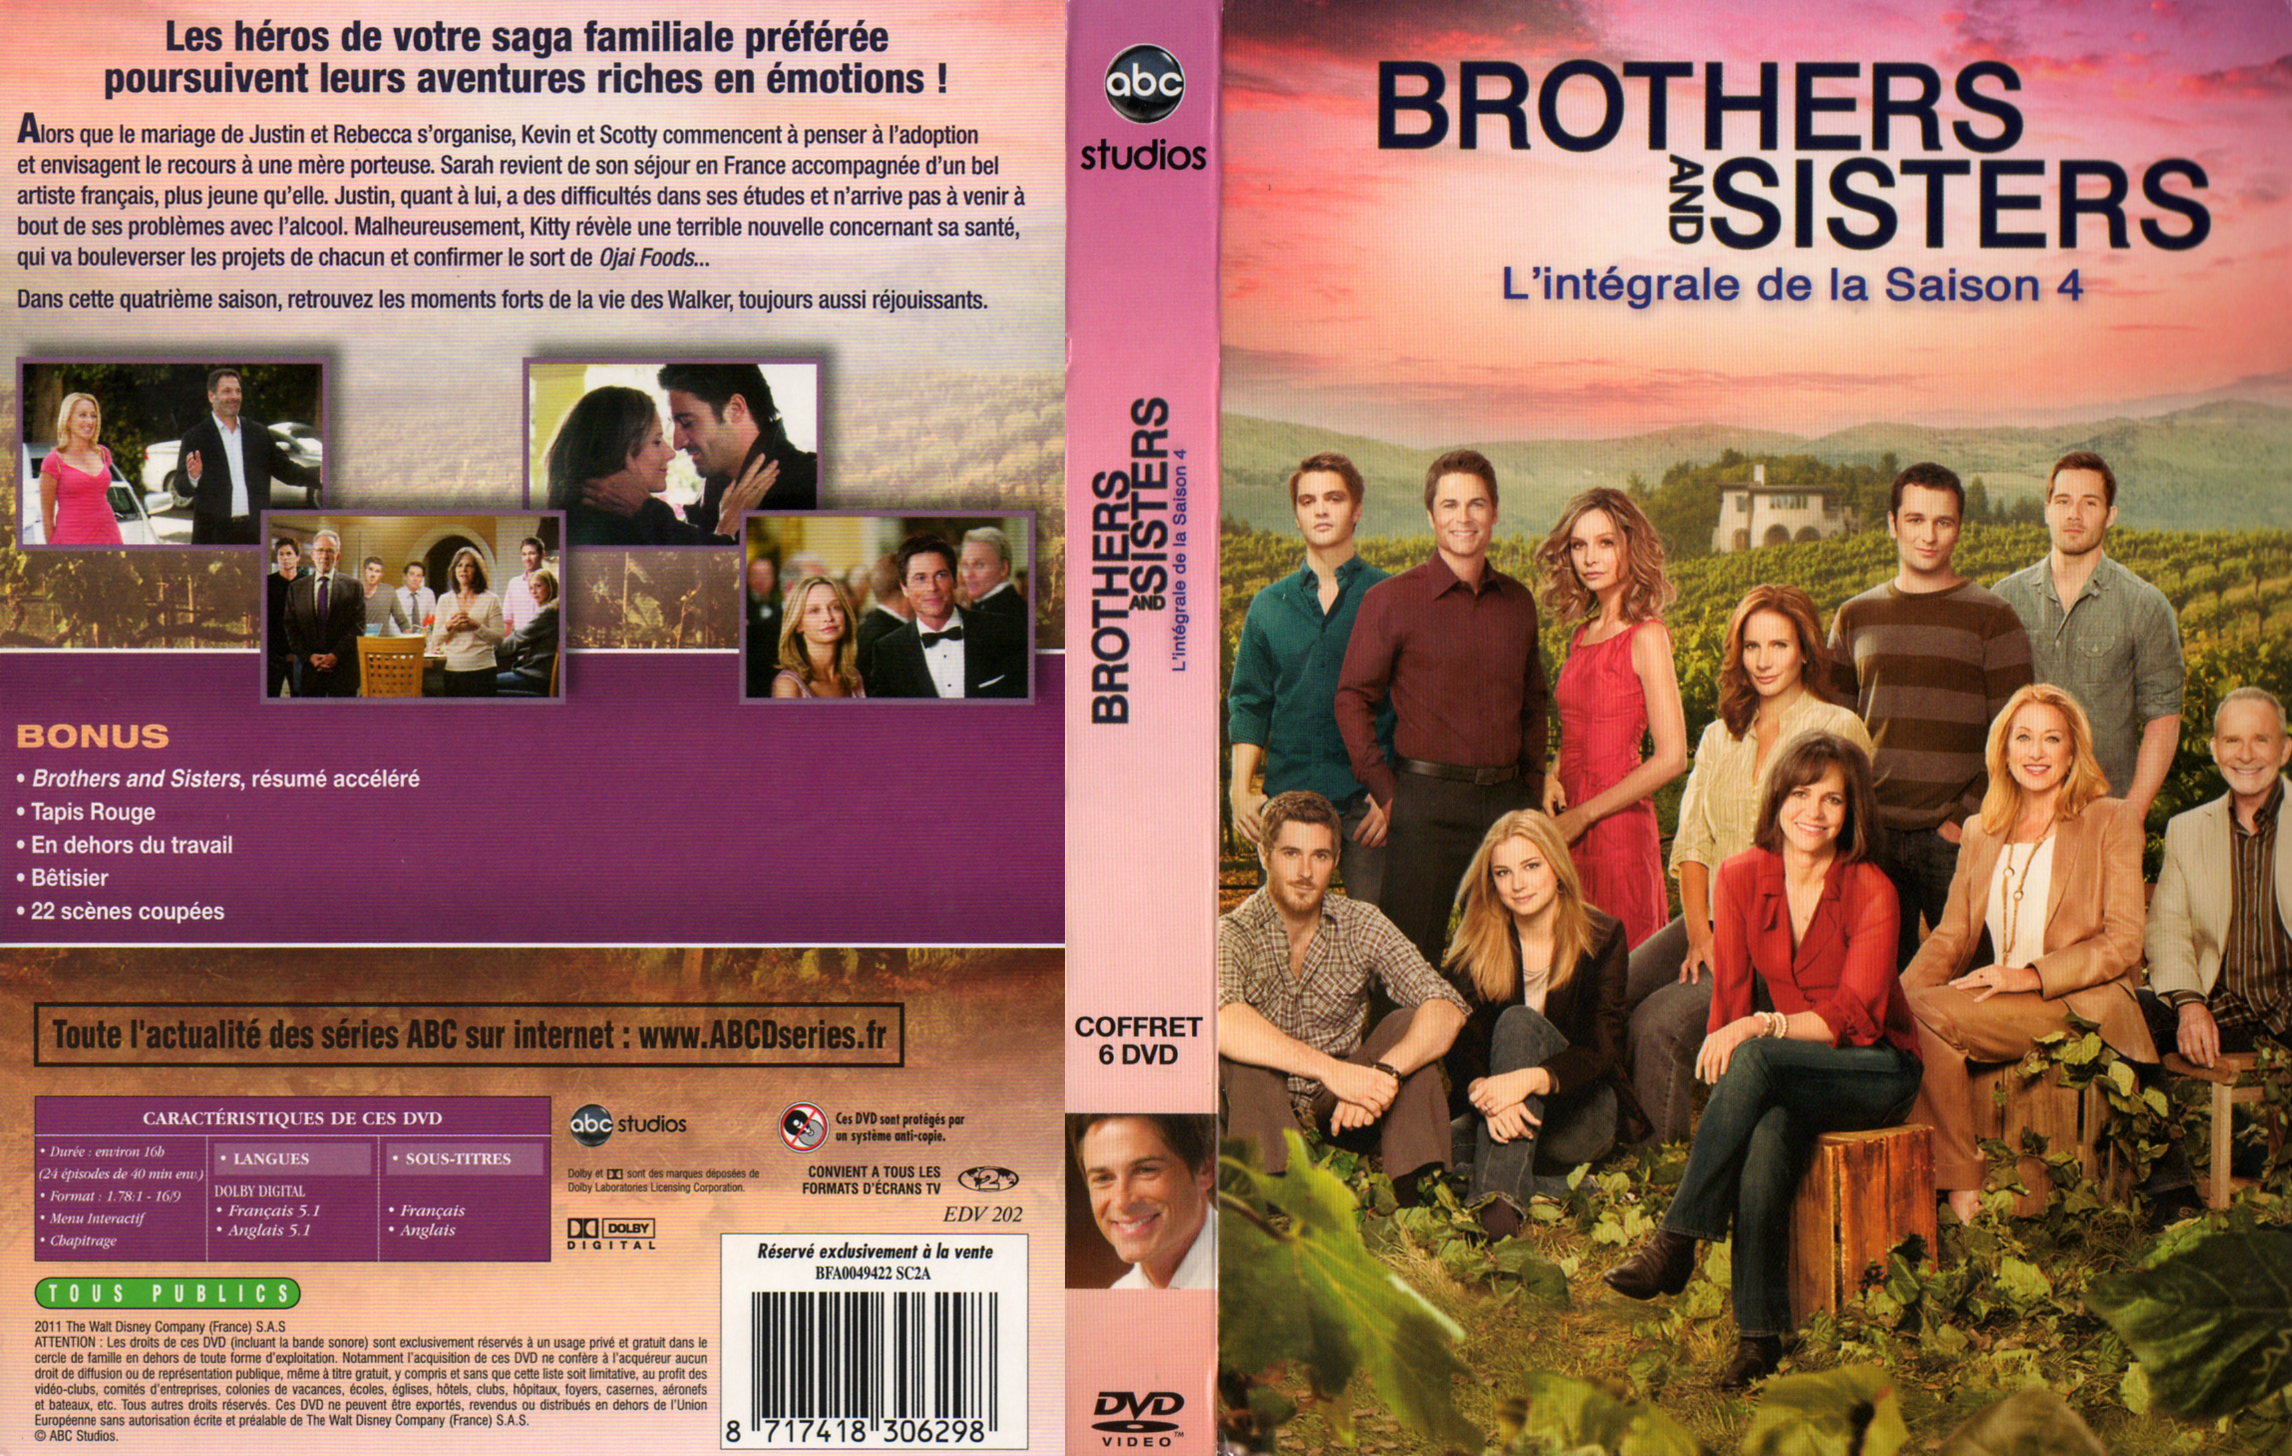 Jaquette DVD Brothers and Sisters Saison 4